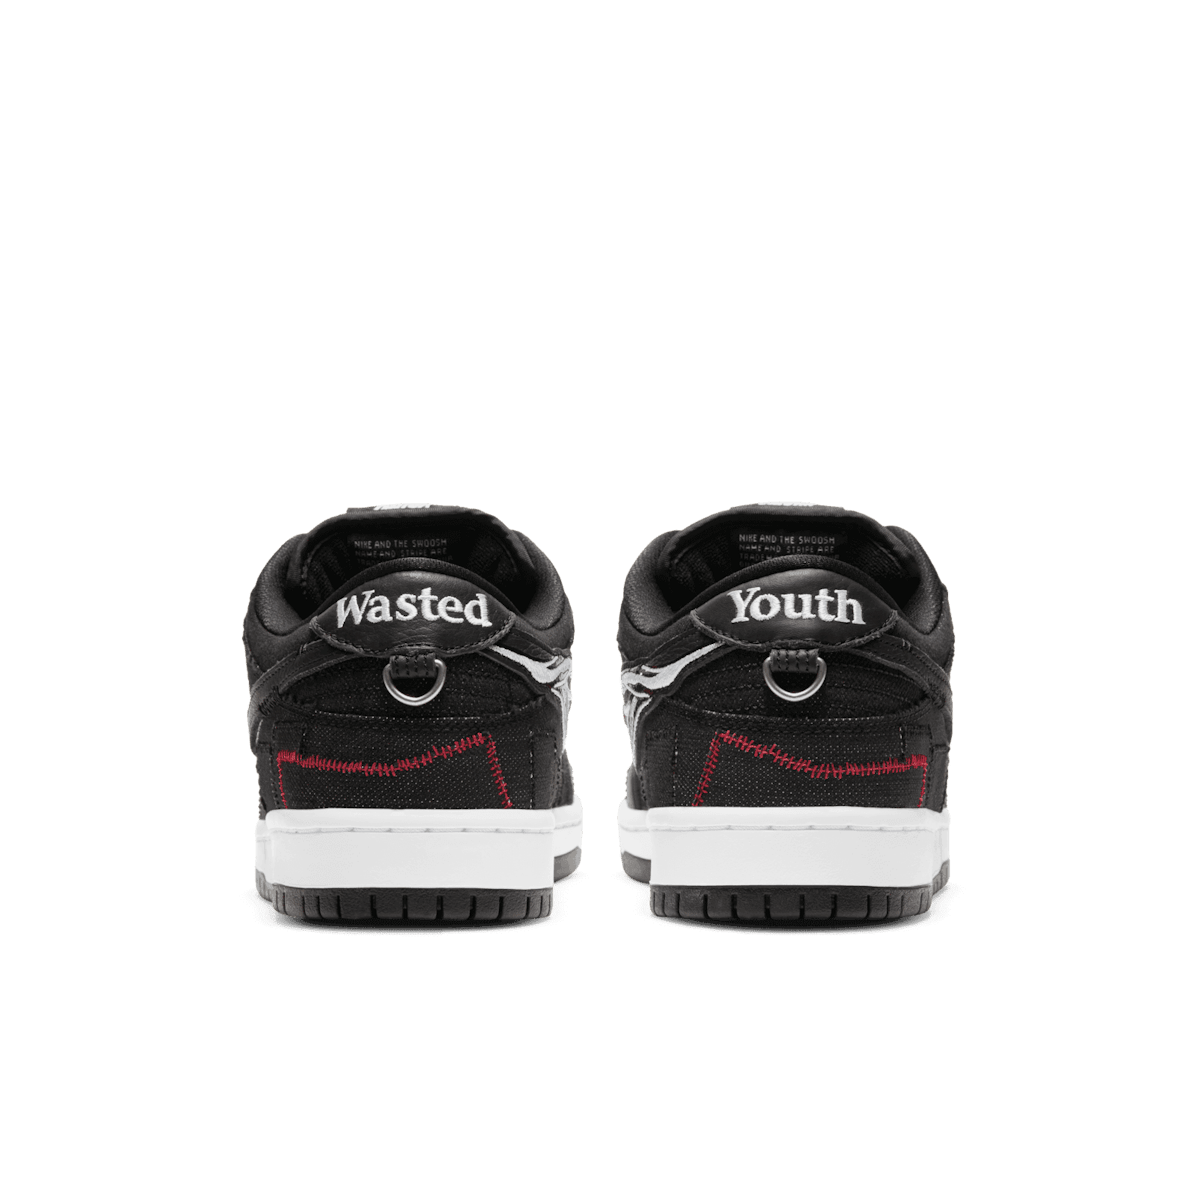 Nike SB Dunk Low Wasted Youth Angle 3